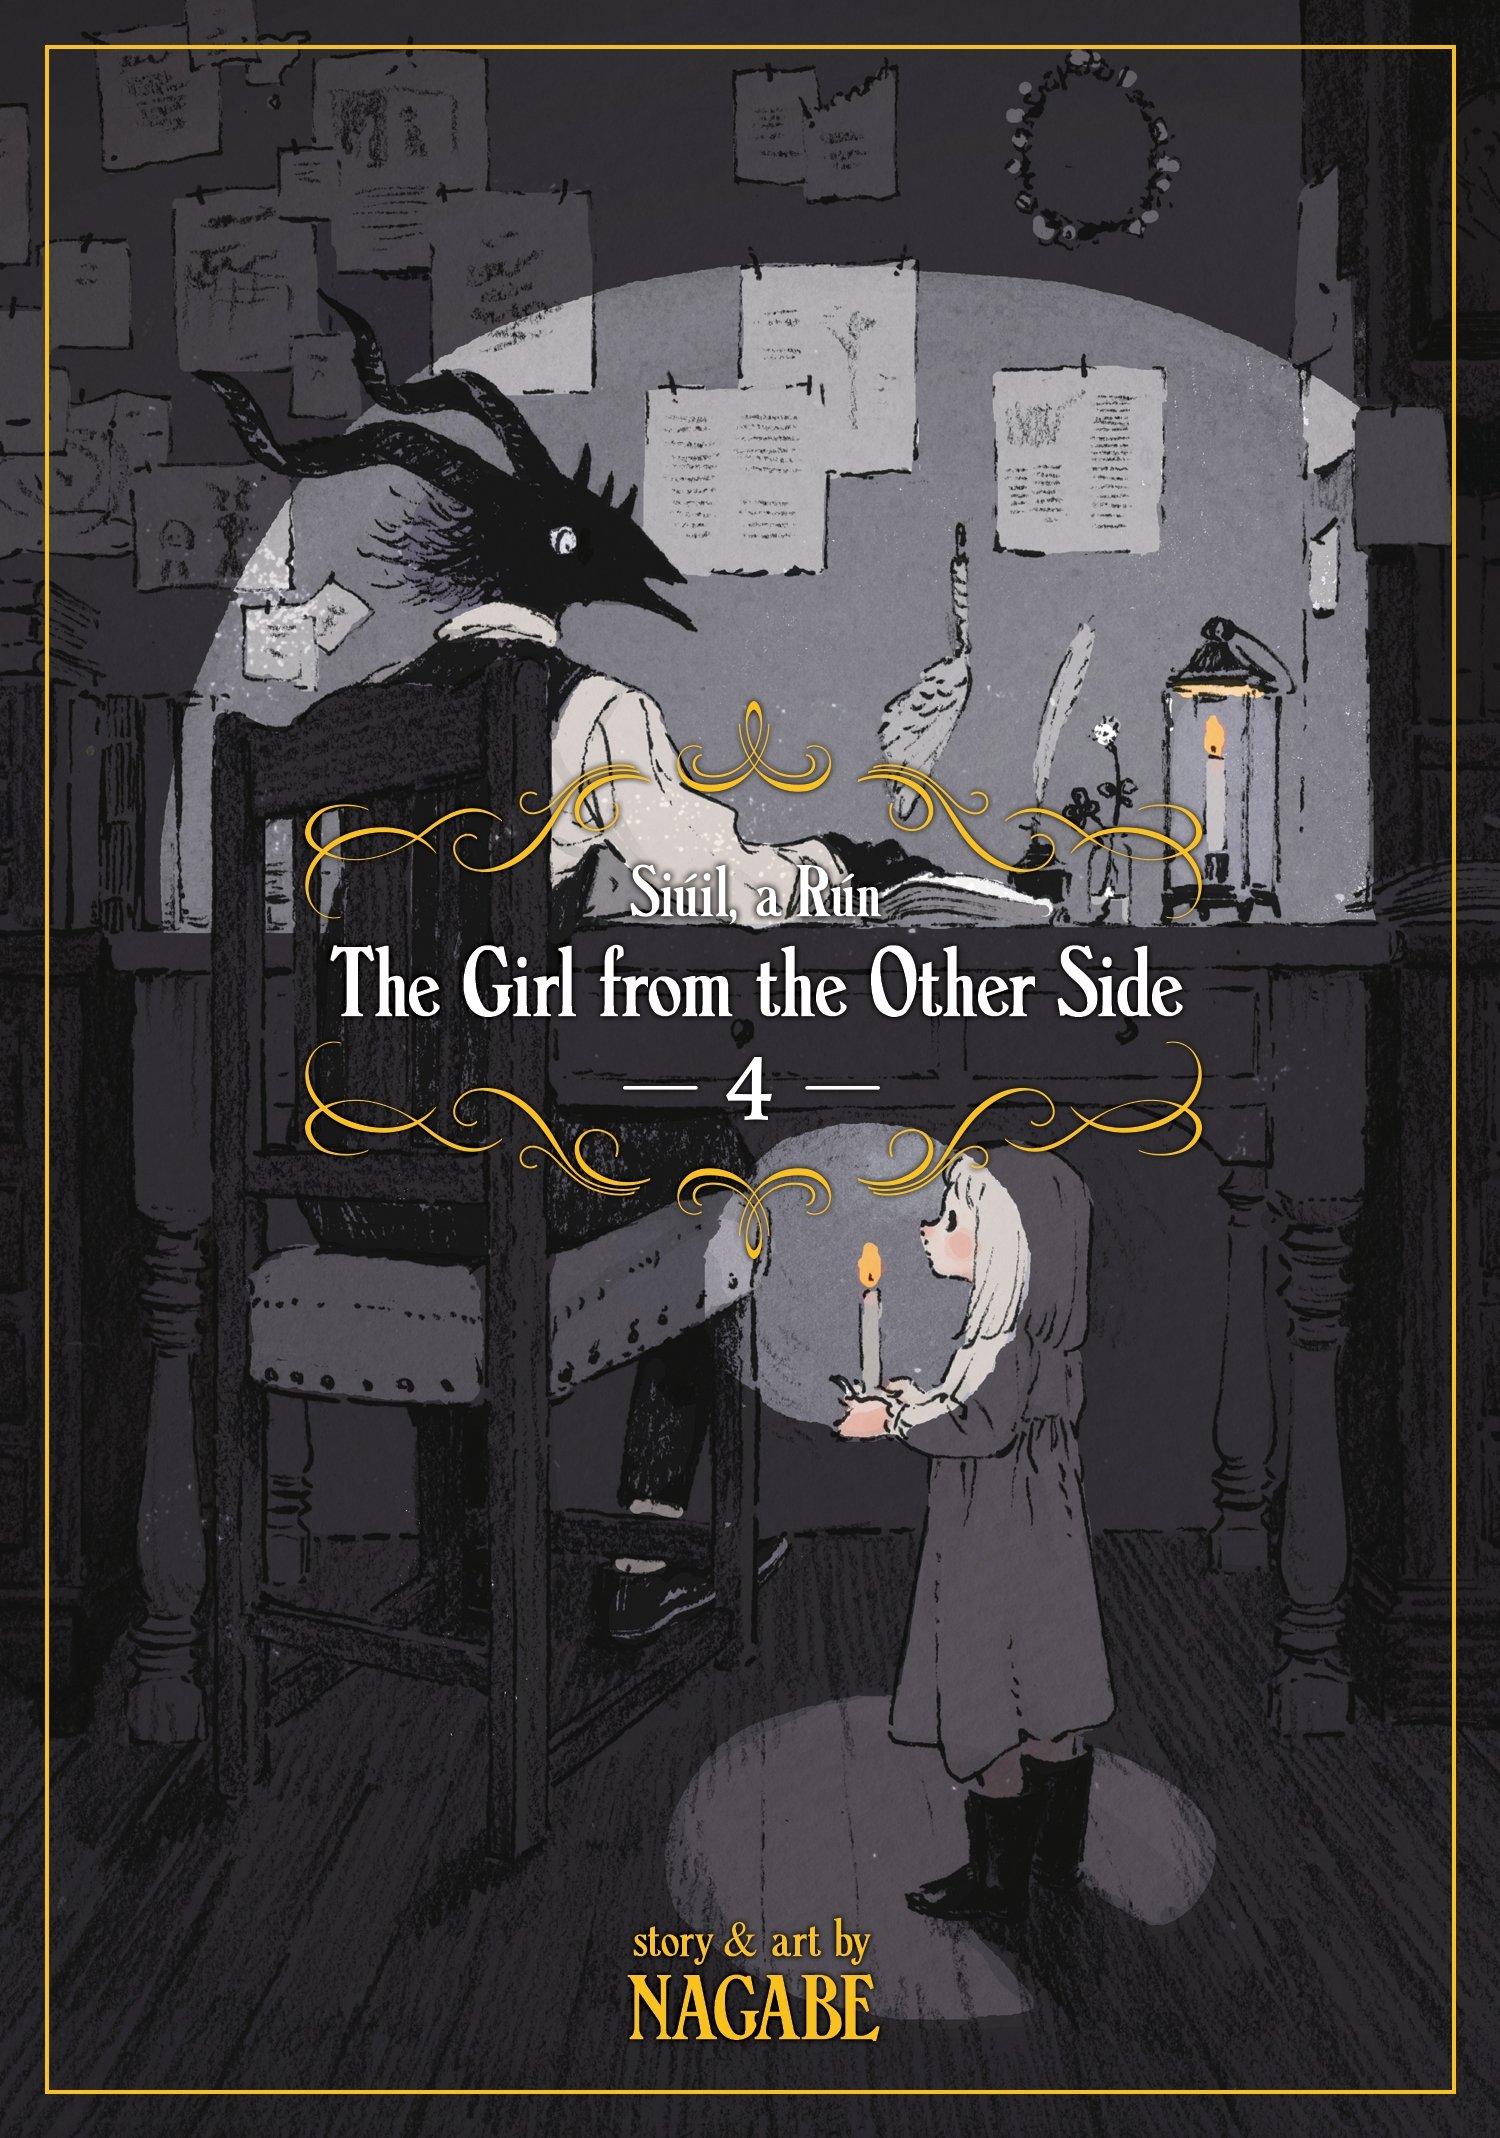 The Girl from the Other Side: Siuil, a Run. Volume 4 | Nagabe